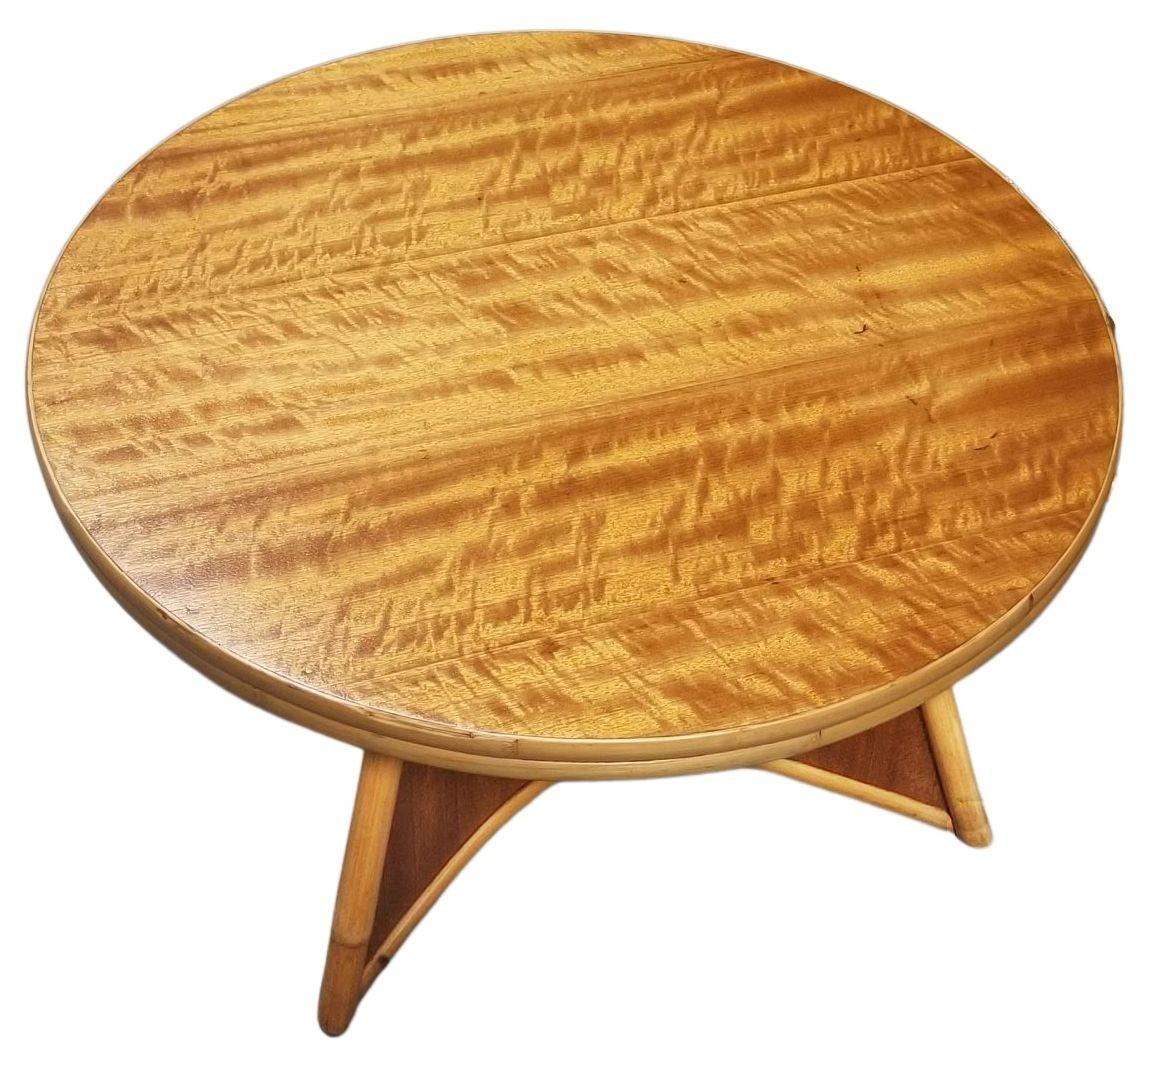 Set of three living room tables designed by Herbert and Shirley Ritts for the Rittz Furniture company. This includes a round center table with a luminous Curly Koa wood top, a Biomorphic coffee table, and a sizeable two-tier square table. The bent